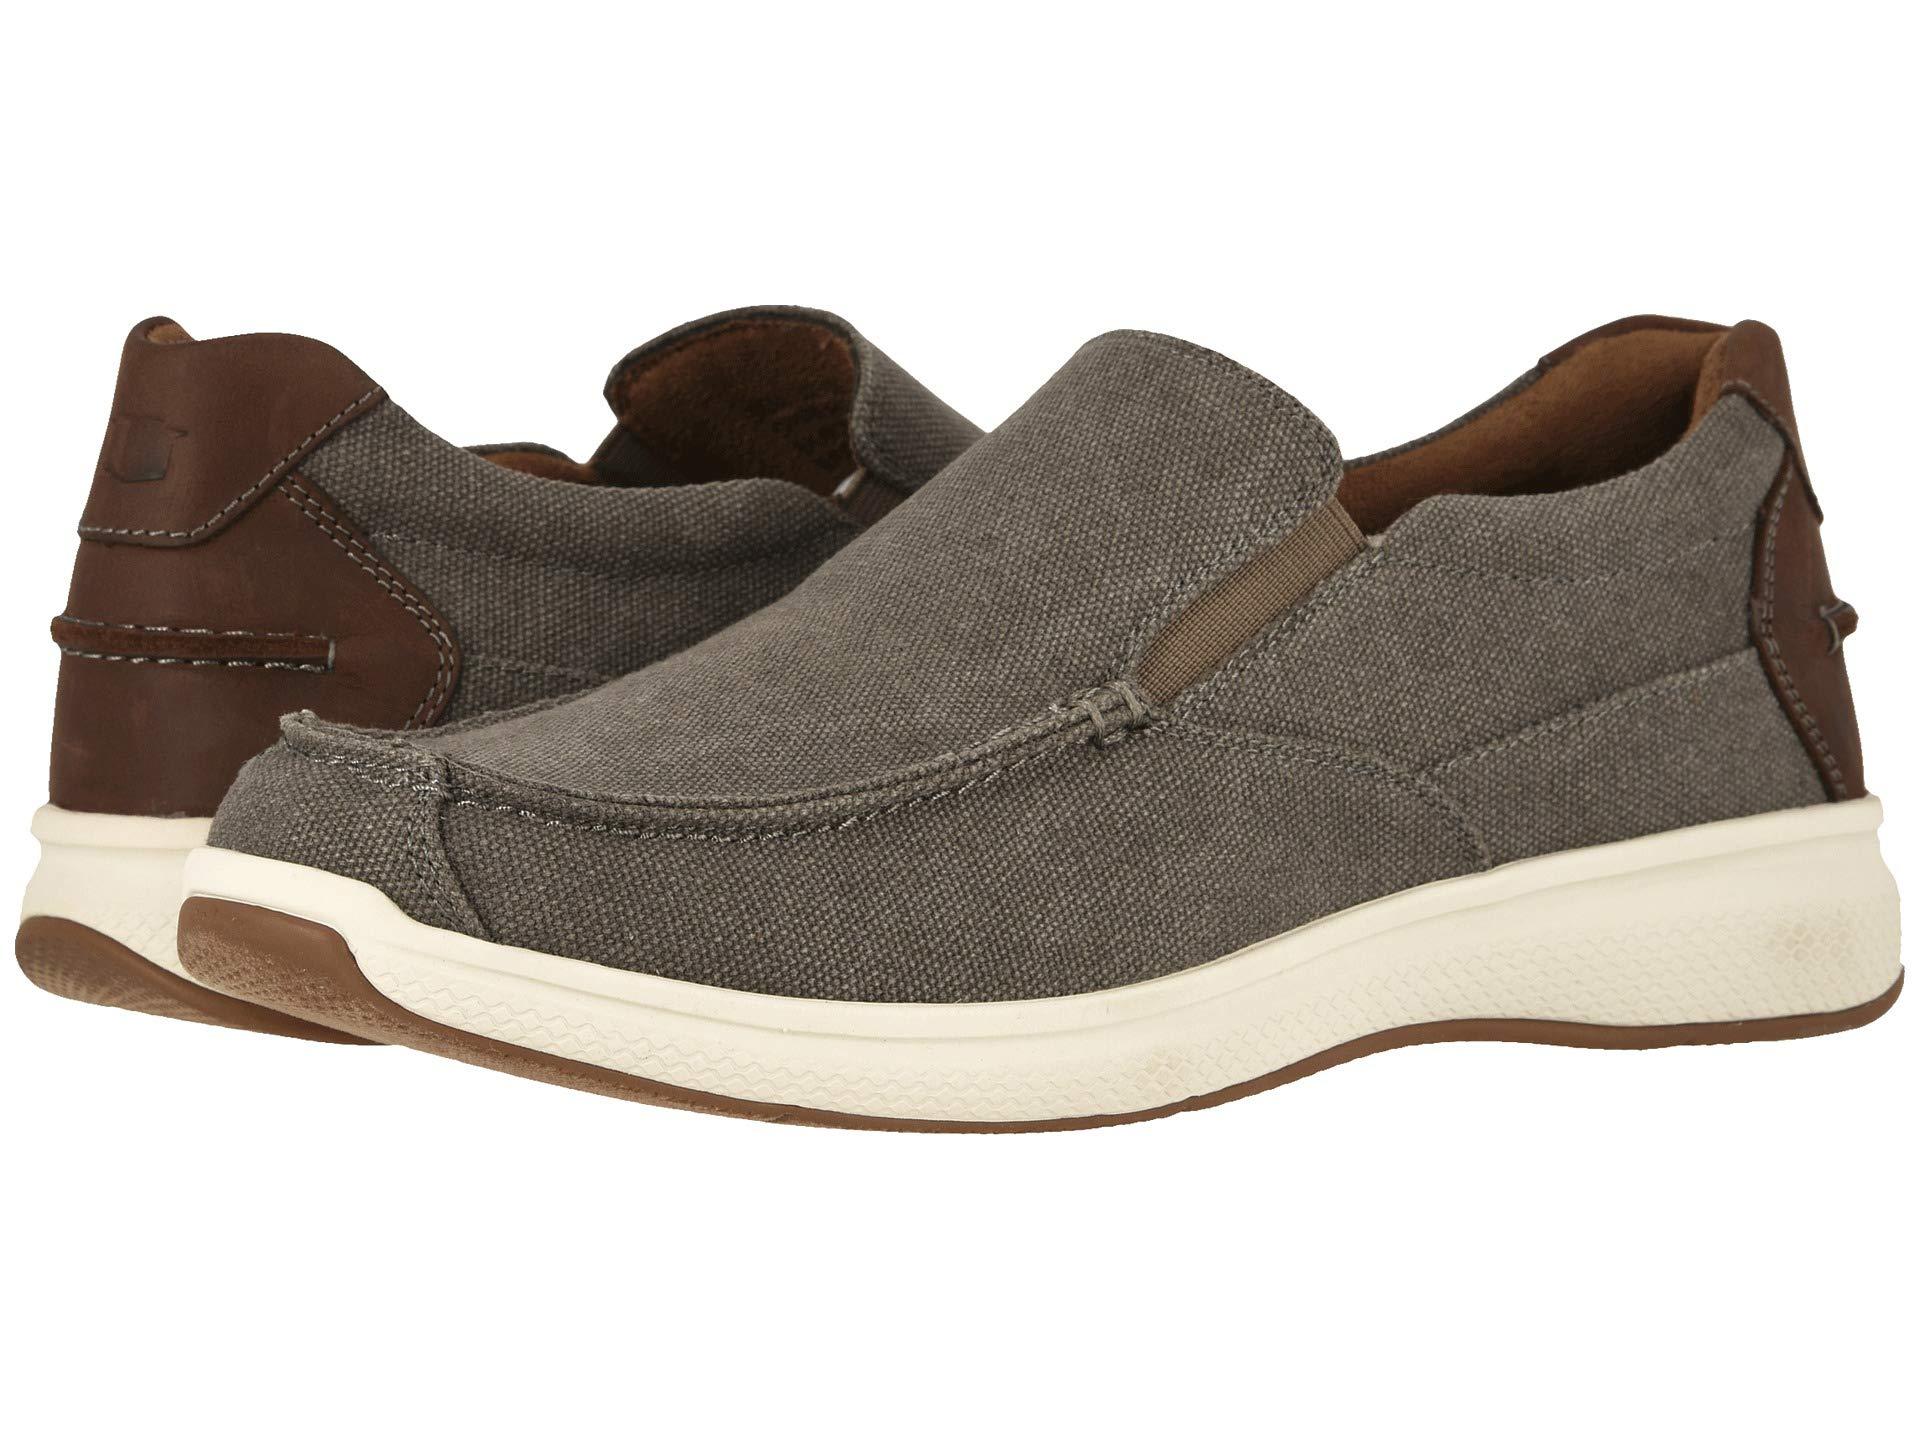 Florsheim Great Lakes Canvas Moc Toe Slip-on in Gray for Men - Lyst